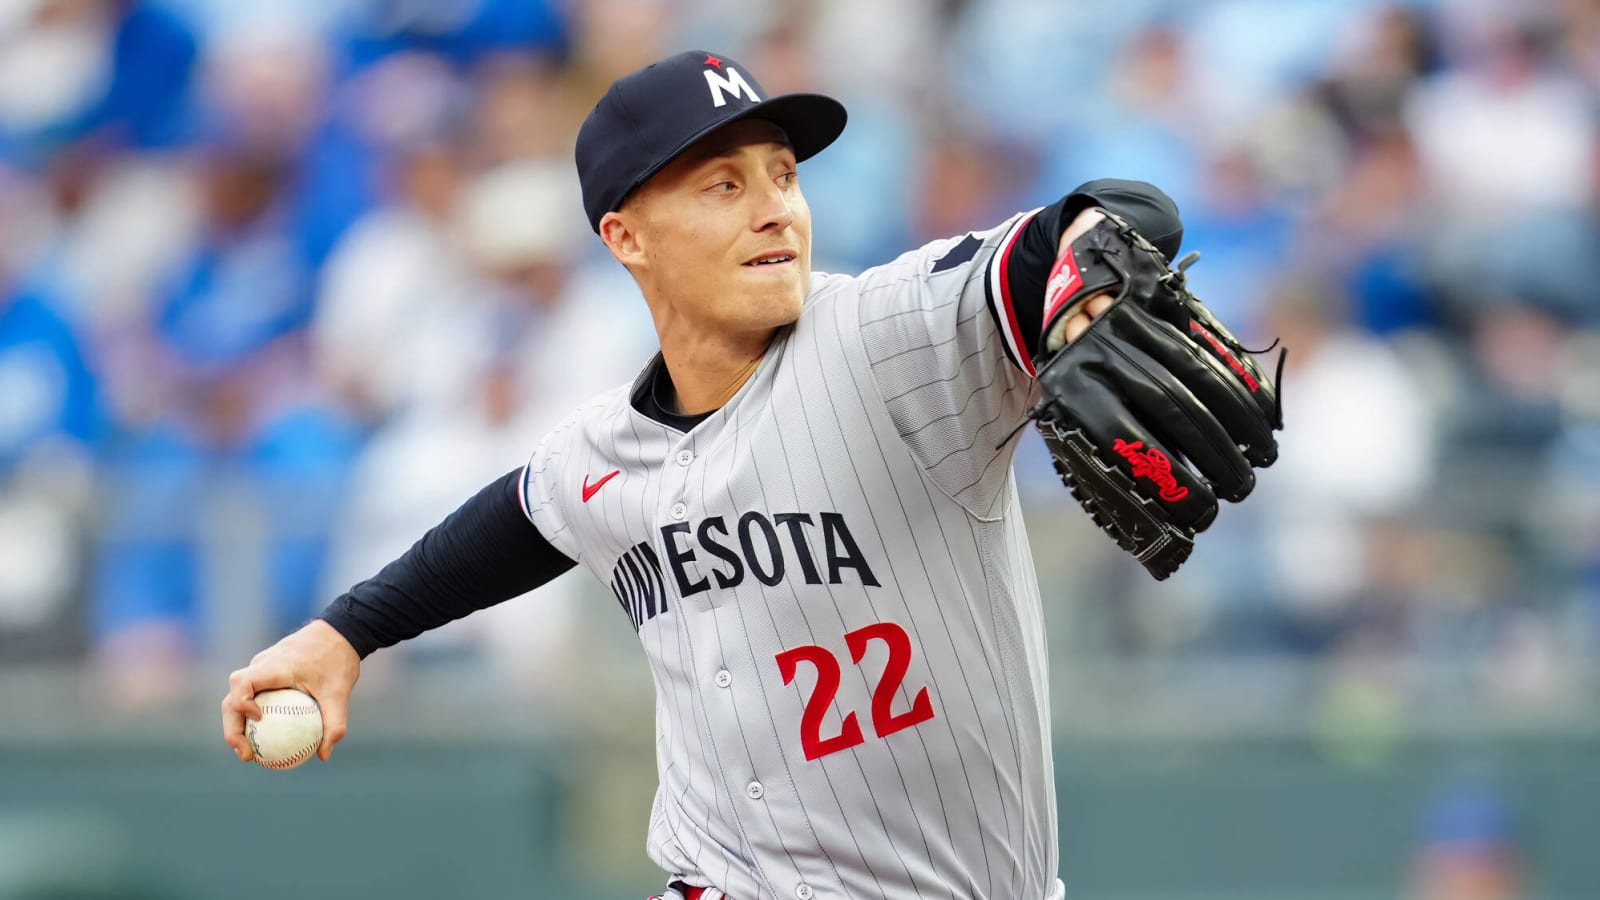 Milwaukee Brewers-Minnesota Twins trade proposal is a win-win for both teams